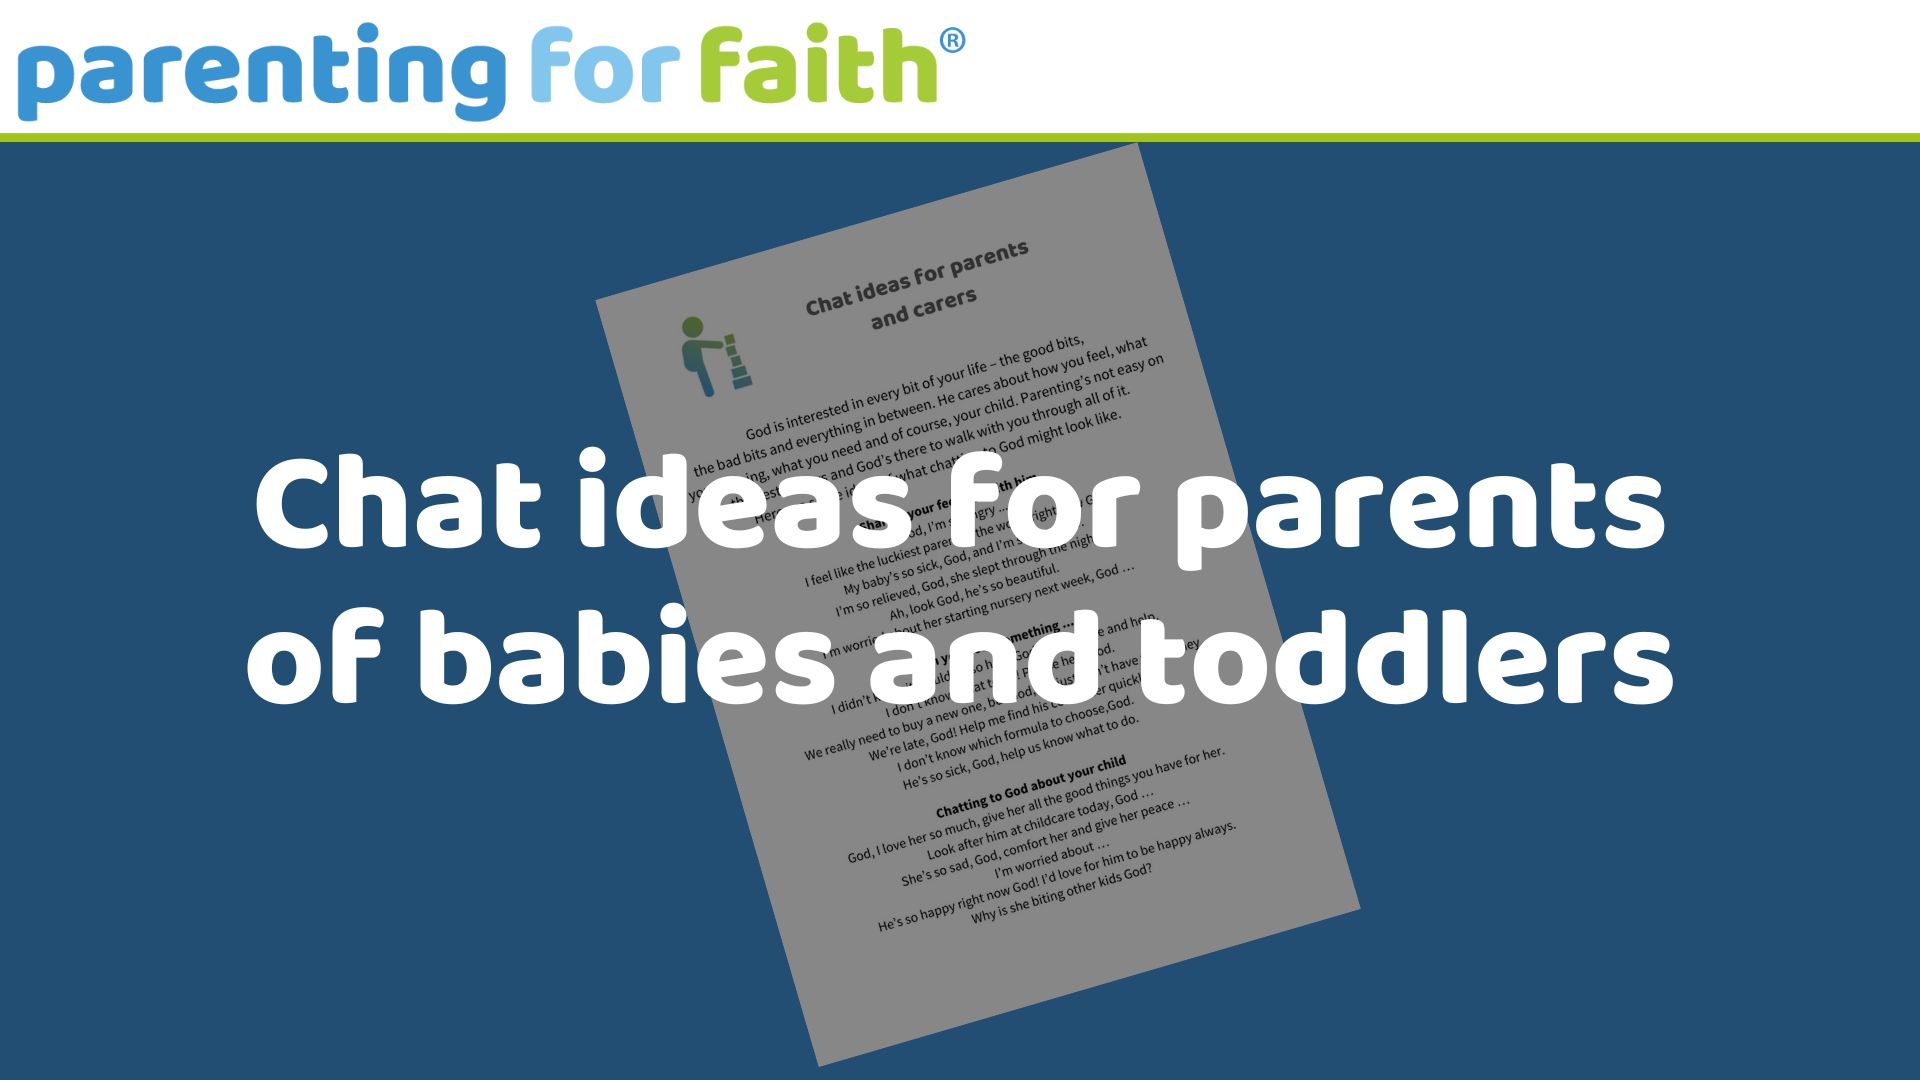 Chat ideas for parents of babies and toddlers